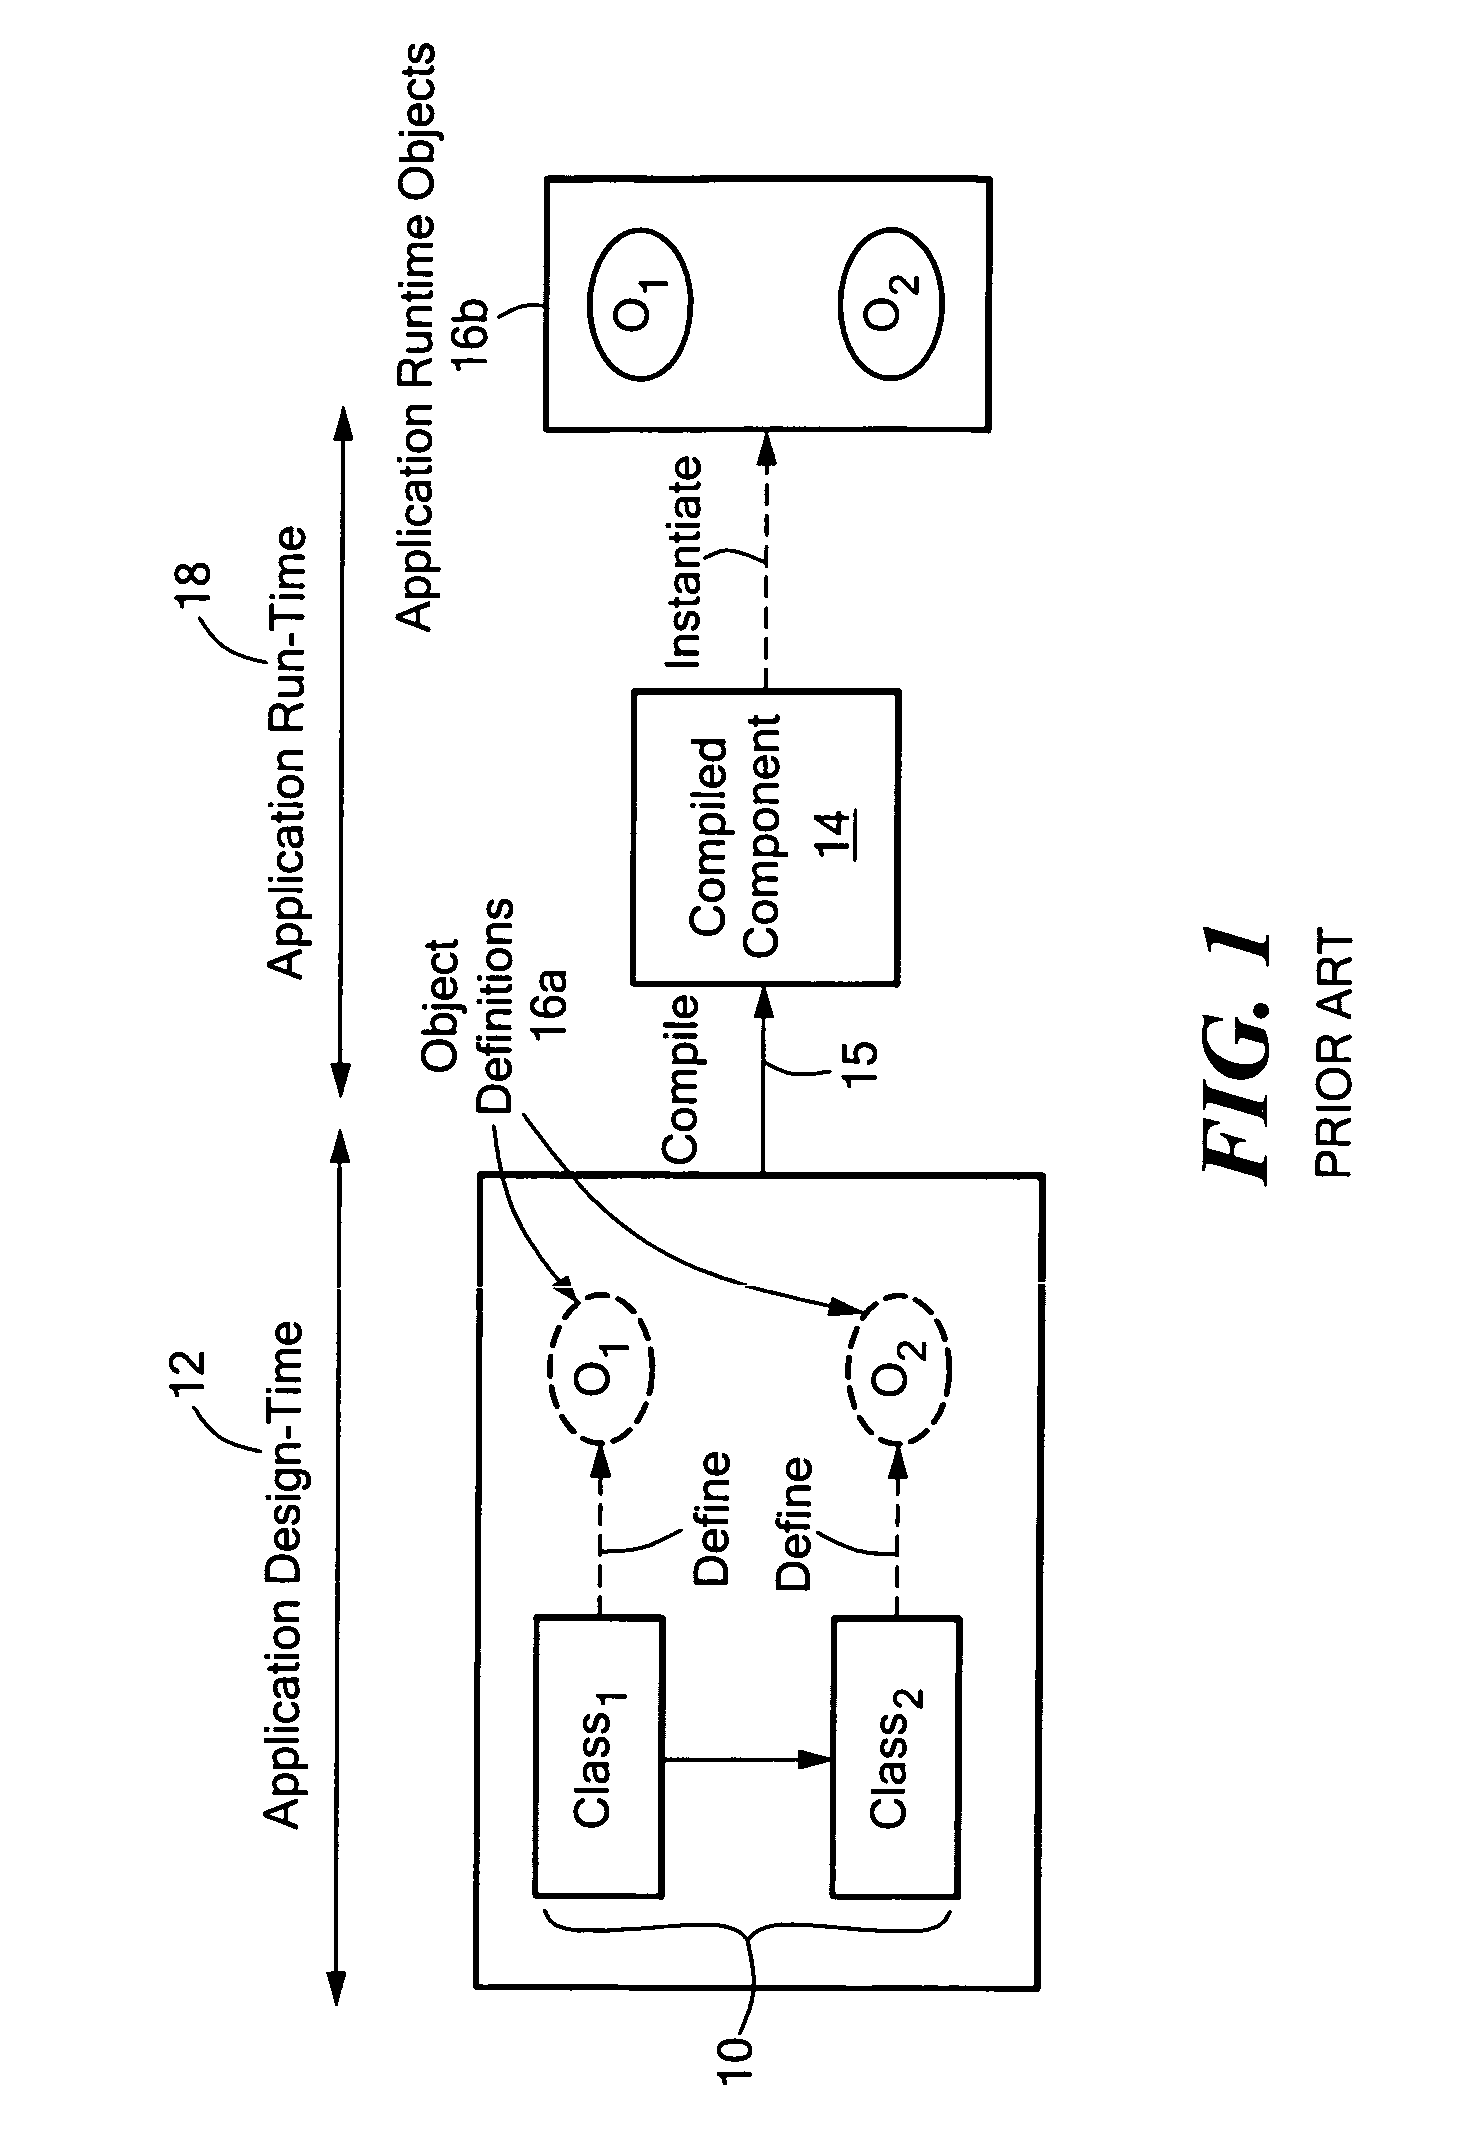 System and method for providing composite applications